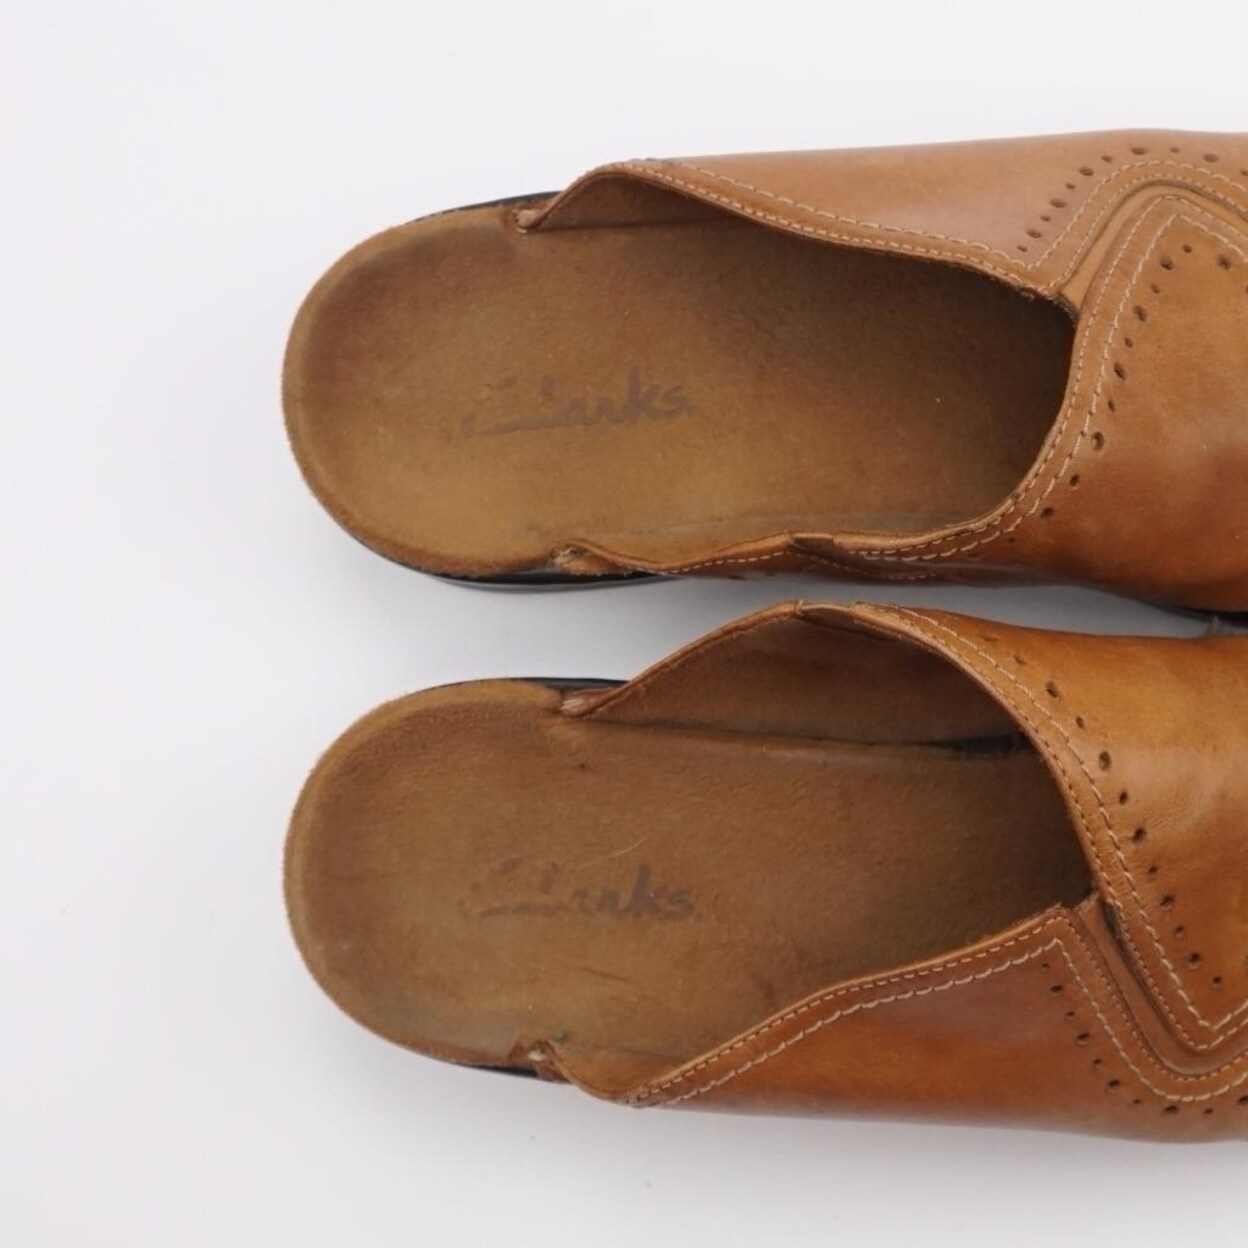 clarks wedge mules